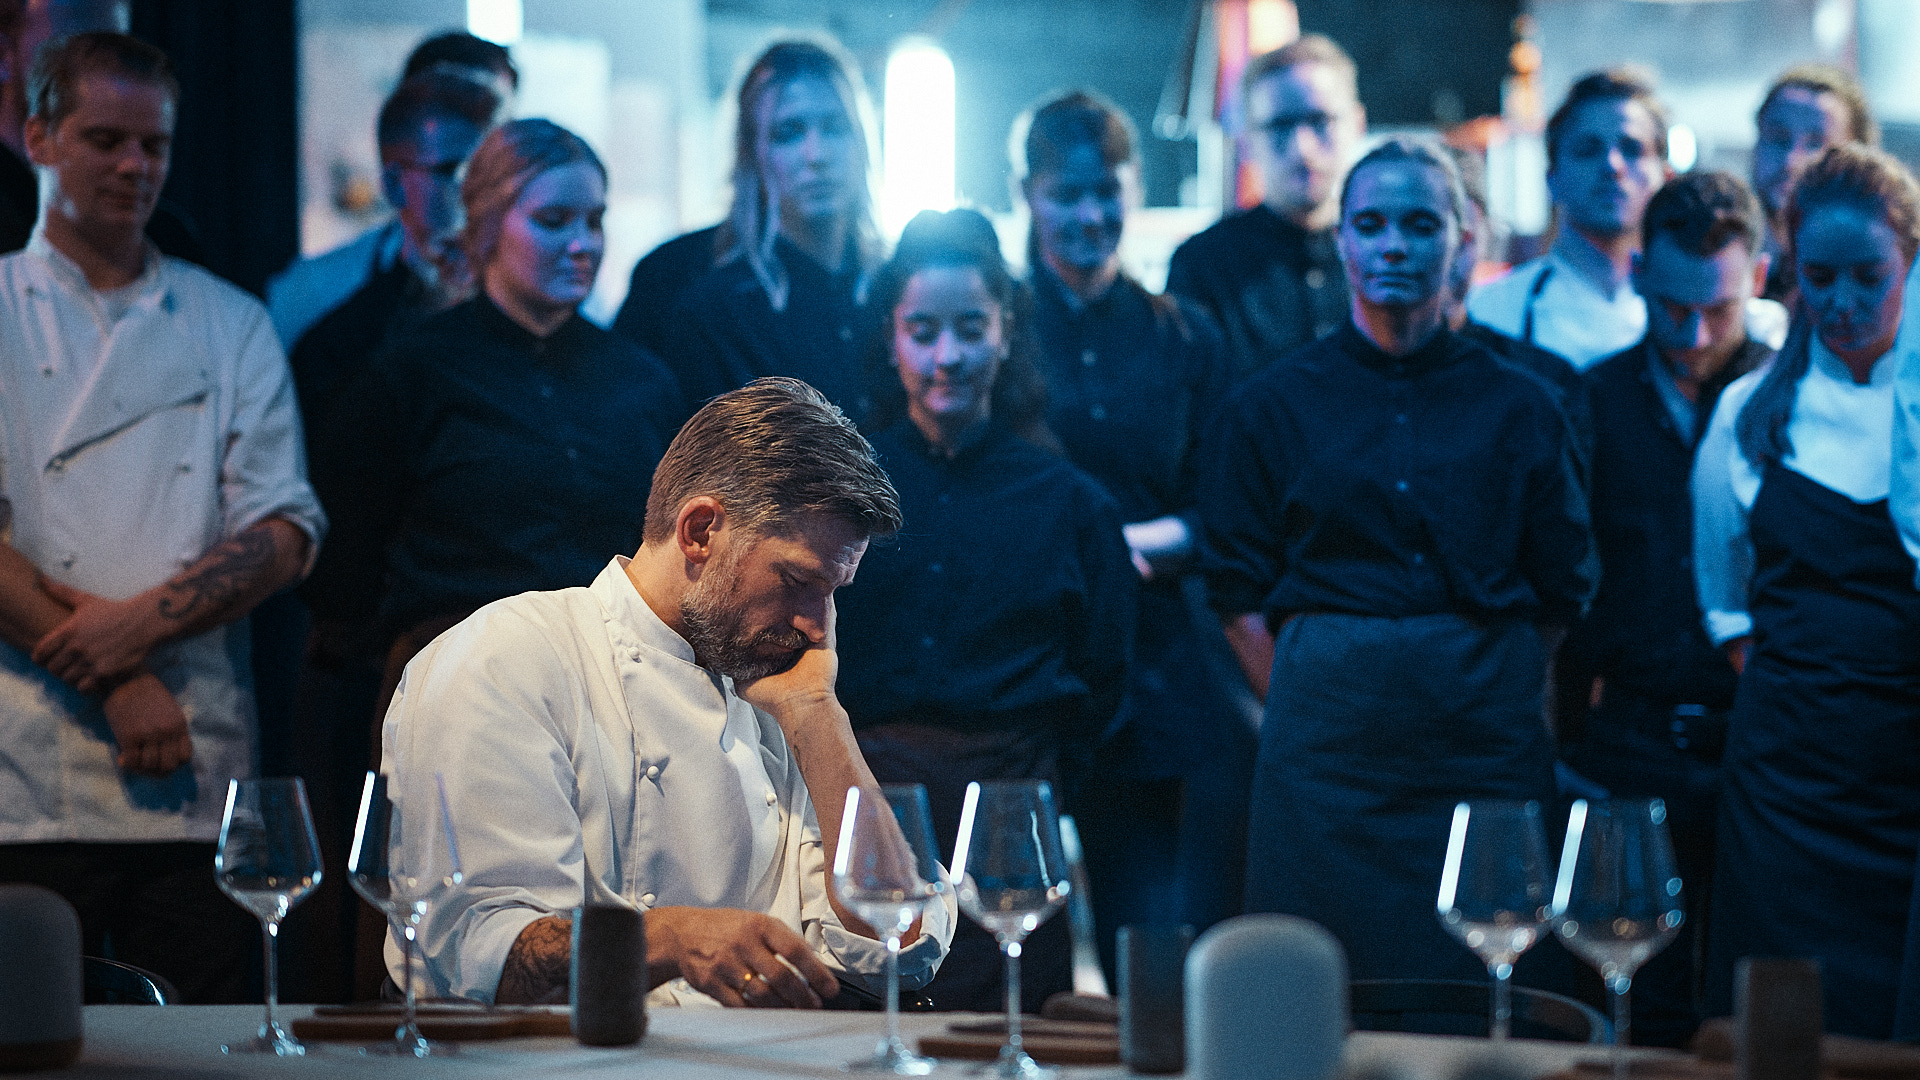 In a dark restaurant, a chef with cropped sandy brown hair and beard sits pensively at a dining table set with wine glasses, surrounded by observing waitstaff in all-black uniforms.